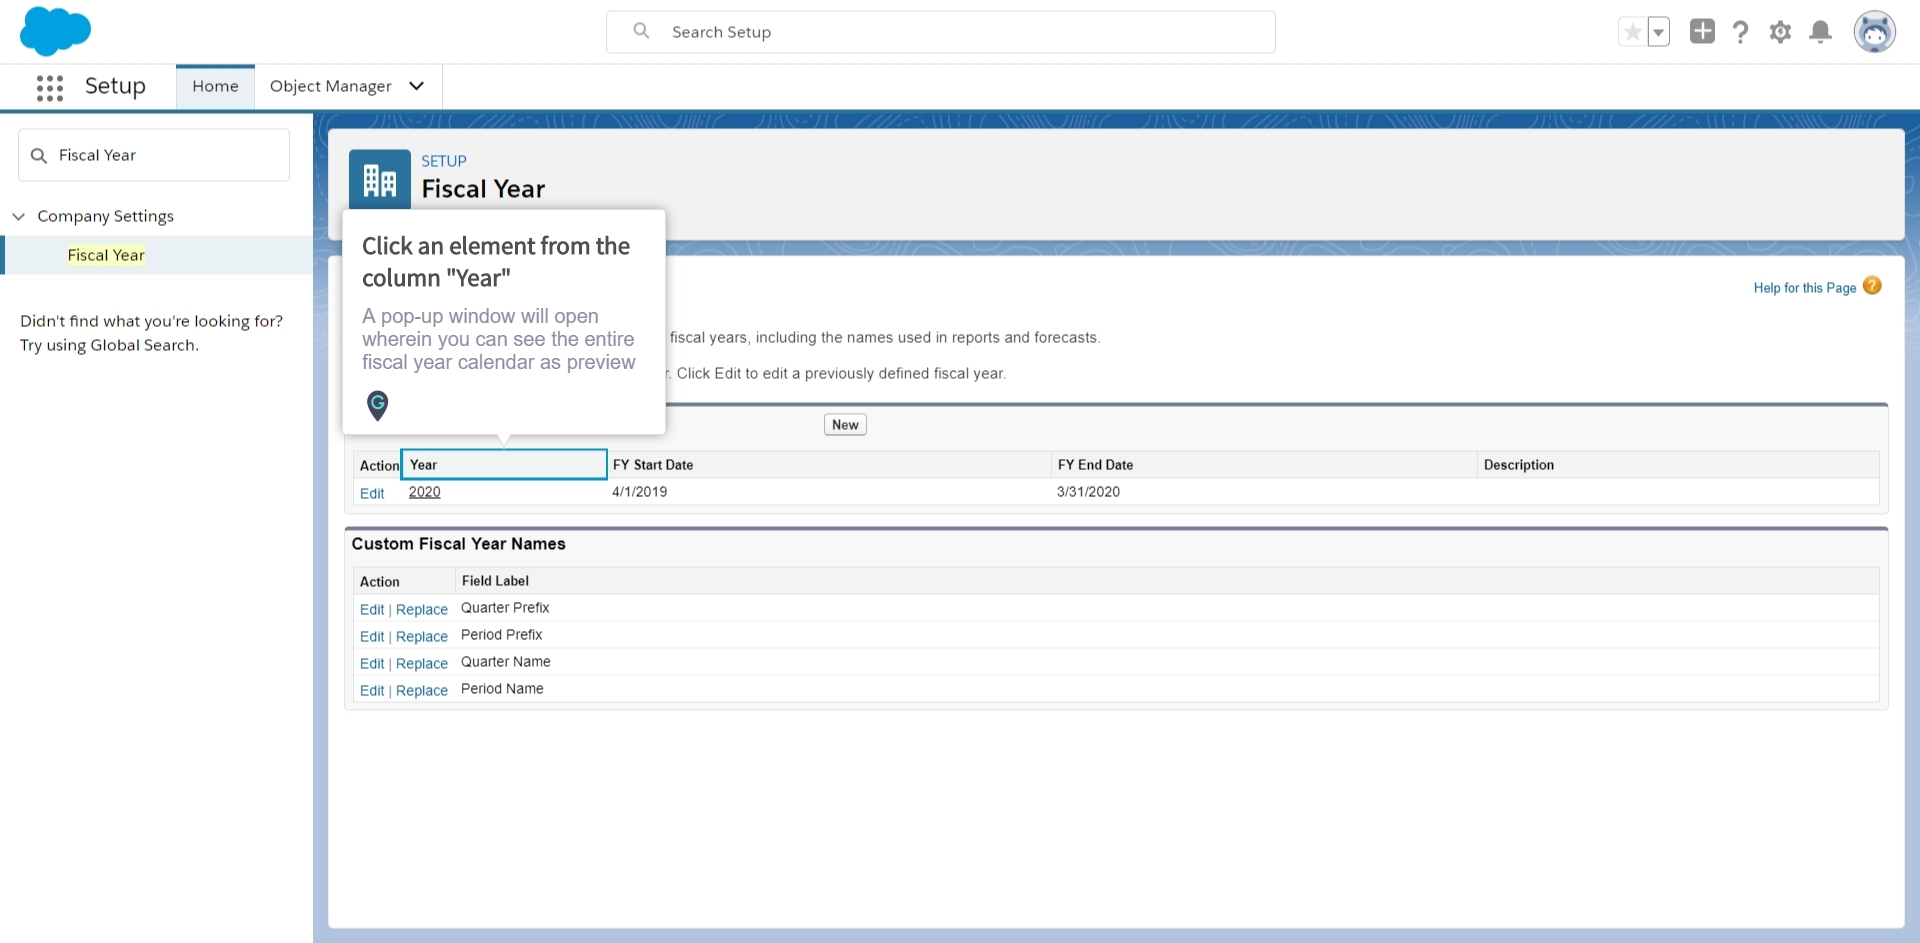 How to preview custom Fiscal Year for the organization in Salesforce